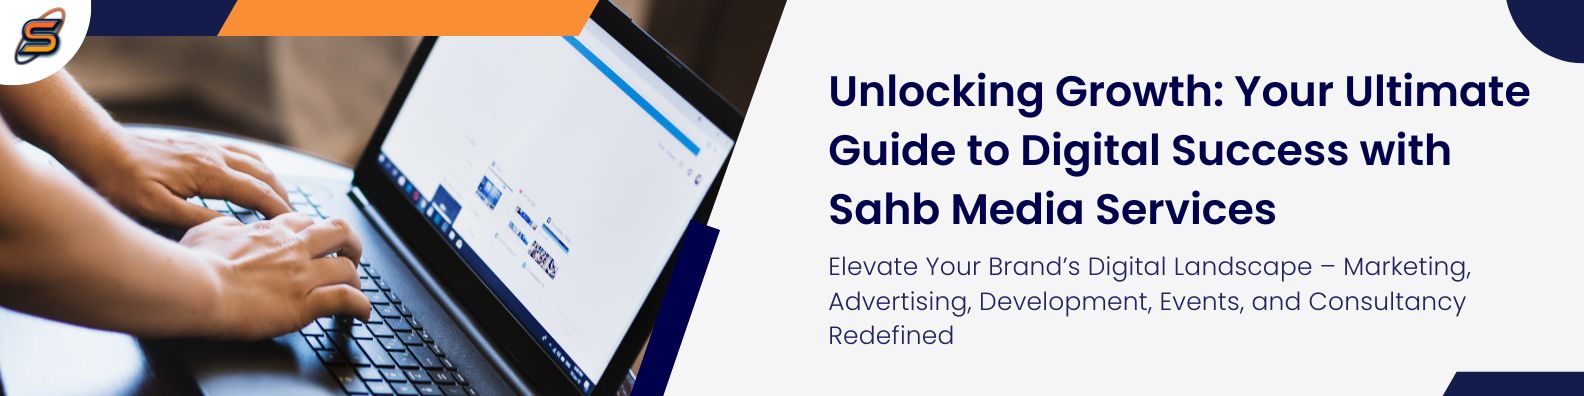 Unlocking Growth: Your Ultimate Guide to Digital Success with Sahb Media Services